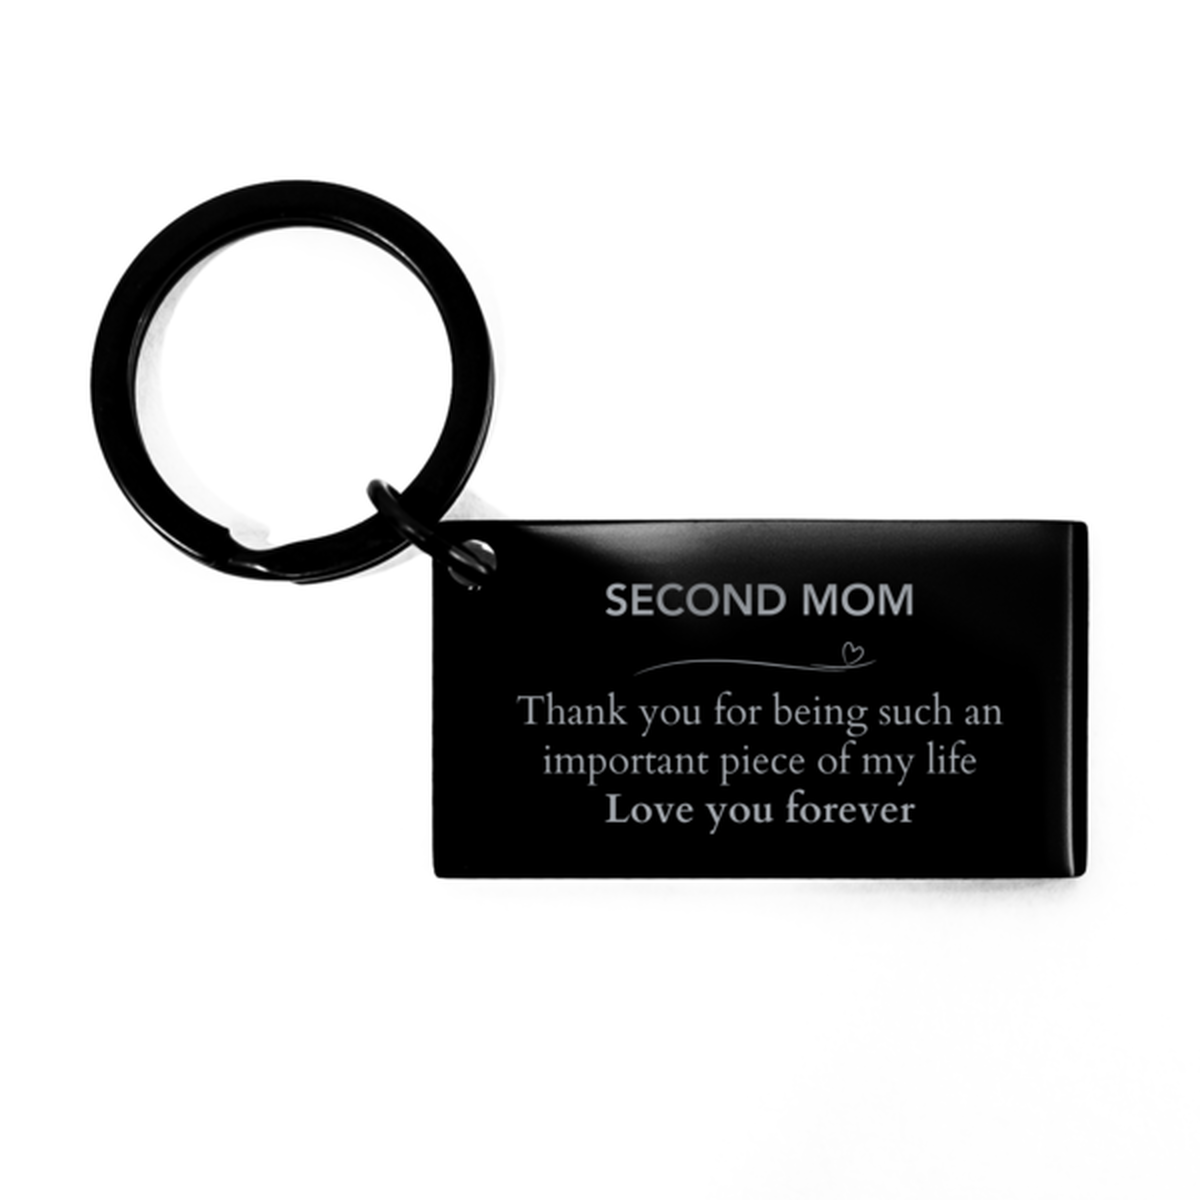 Appropriate Second Mom Keychain Epic Birthday Gifts for Second Mom Thank you for being such an important piece of my life Second Mom Christmas Mothers Fathers Day